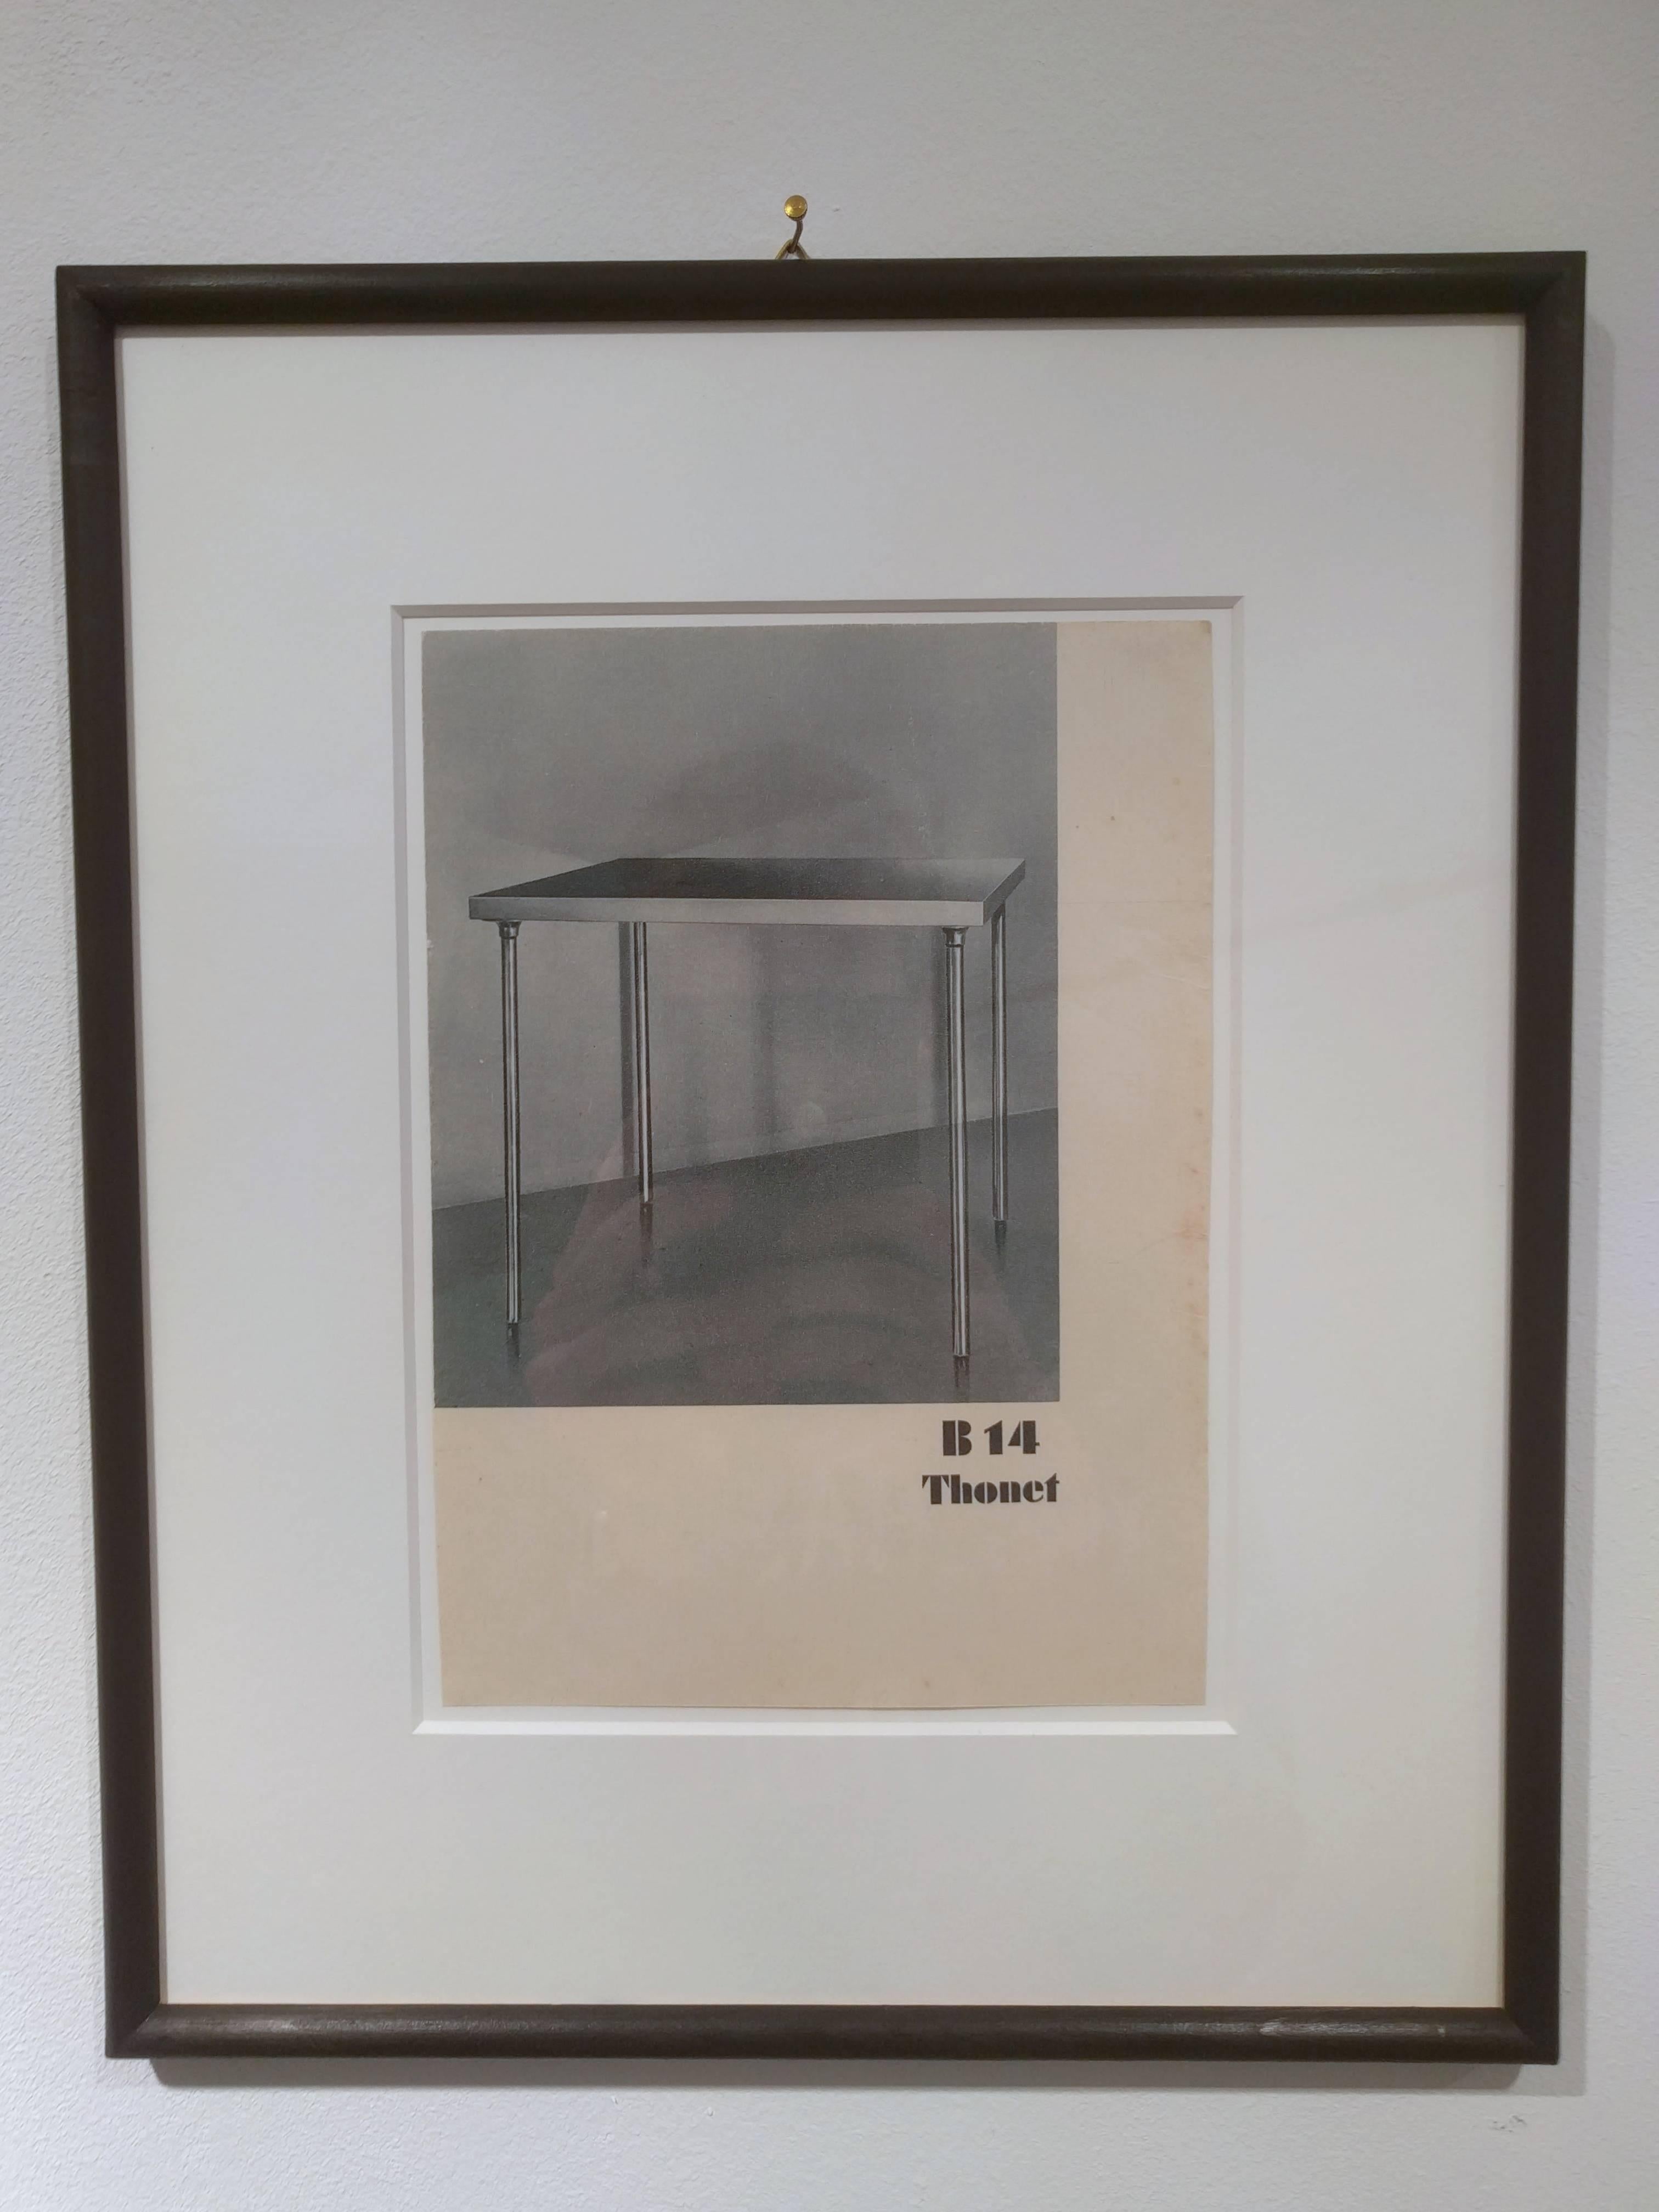 Framed Cards from the Original Thonet Katalog Stahlrohrmöbel Bauhaus In Excellent Condition For Sale In Bern, CH